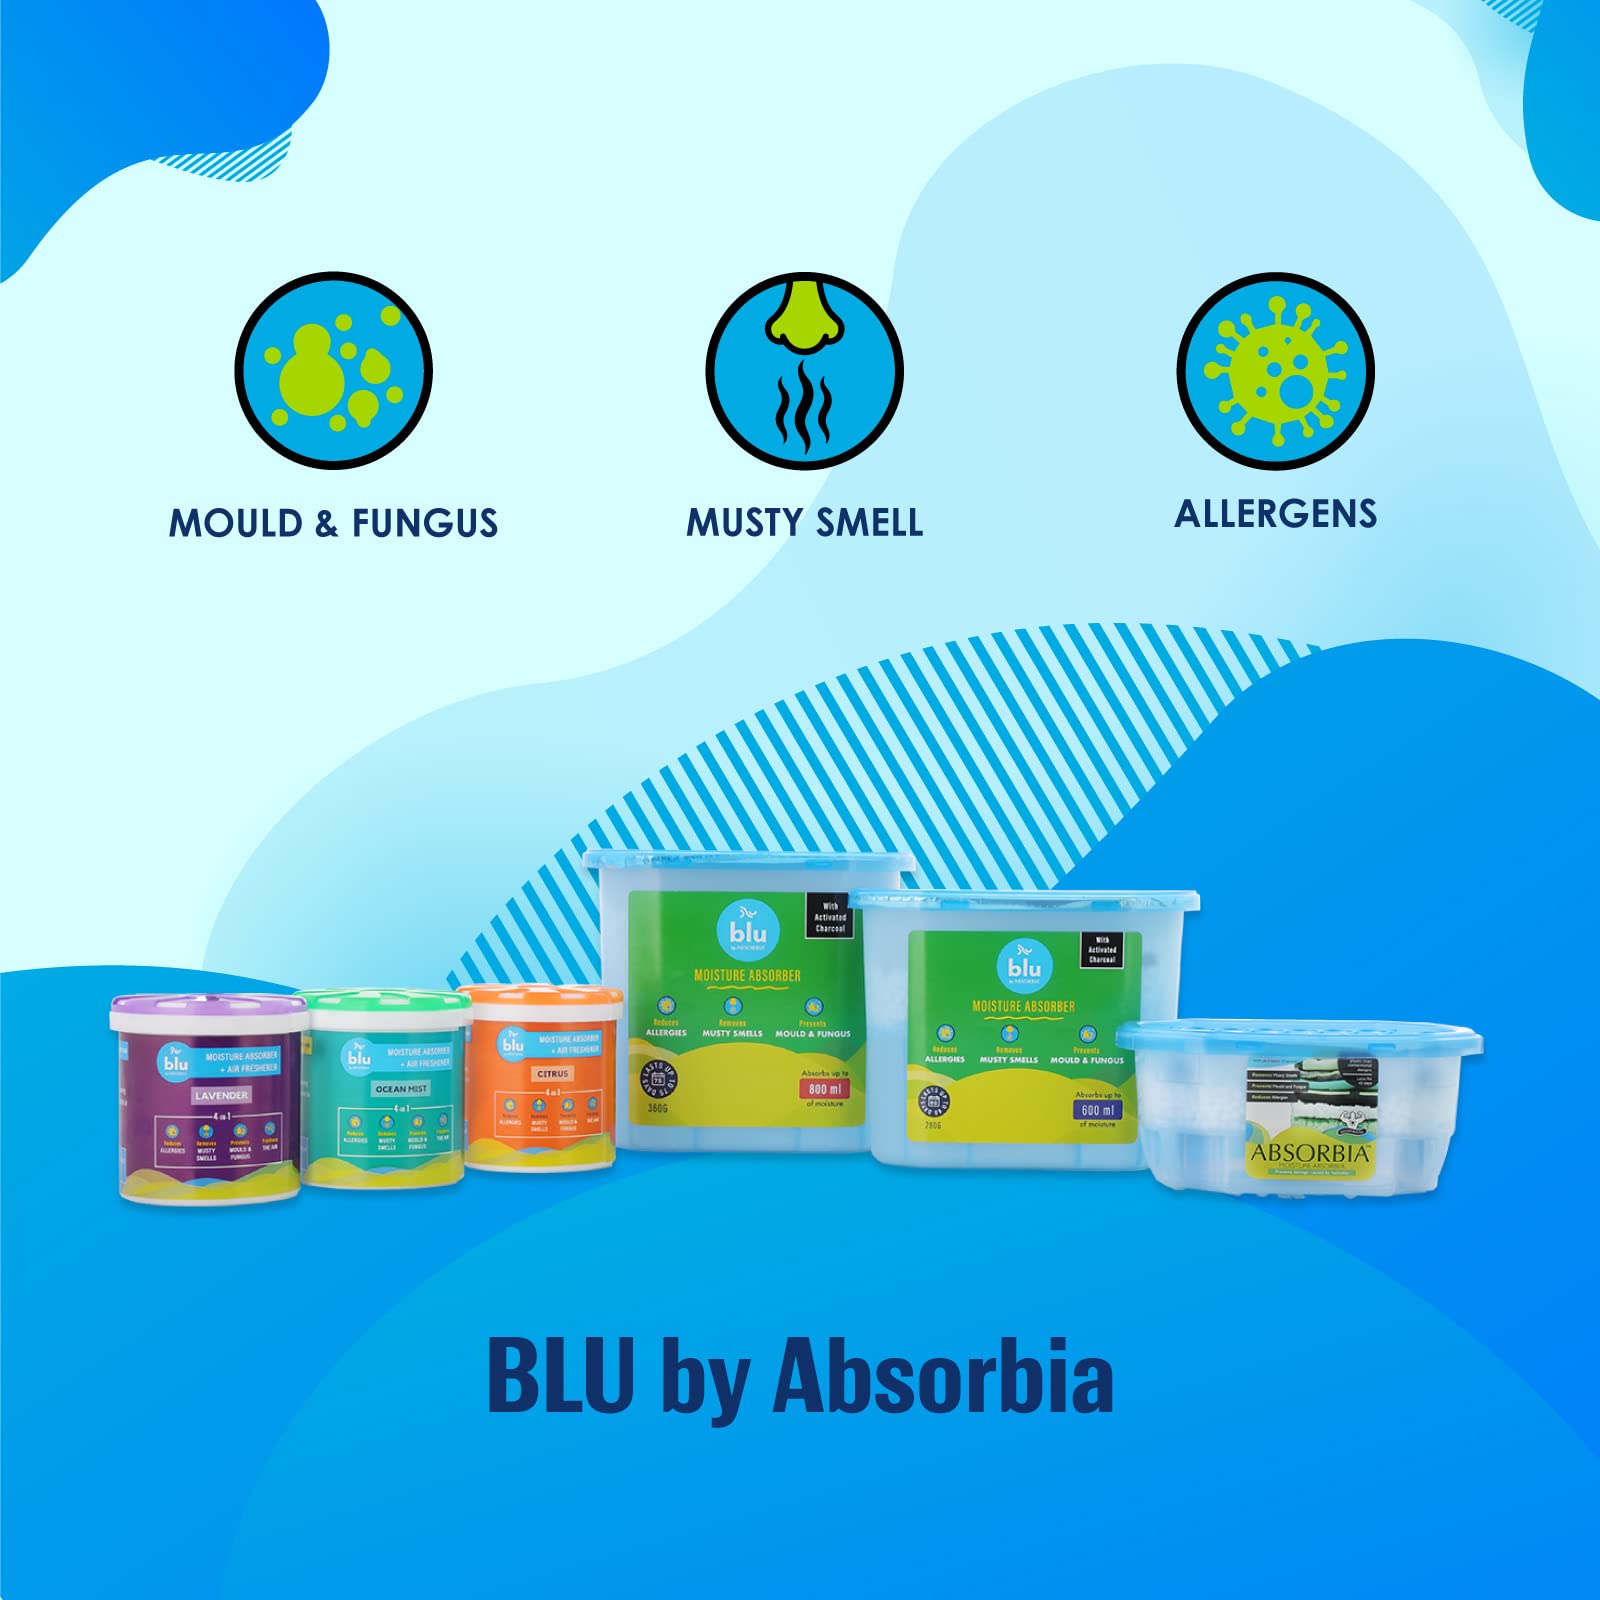 BLU by Absorbia | Moisture Absorber with Activated Charcoal | Saver Pack of 6 (200gms X 6 Boxes) | Absorption Capacity 400ml each Box | Dehumidifier for Small Storage Spaces | Fights Against Moisture, Mould, Fungus & Musty smells